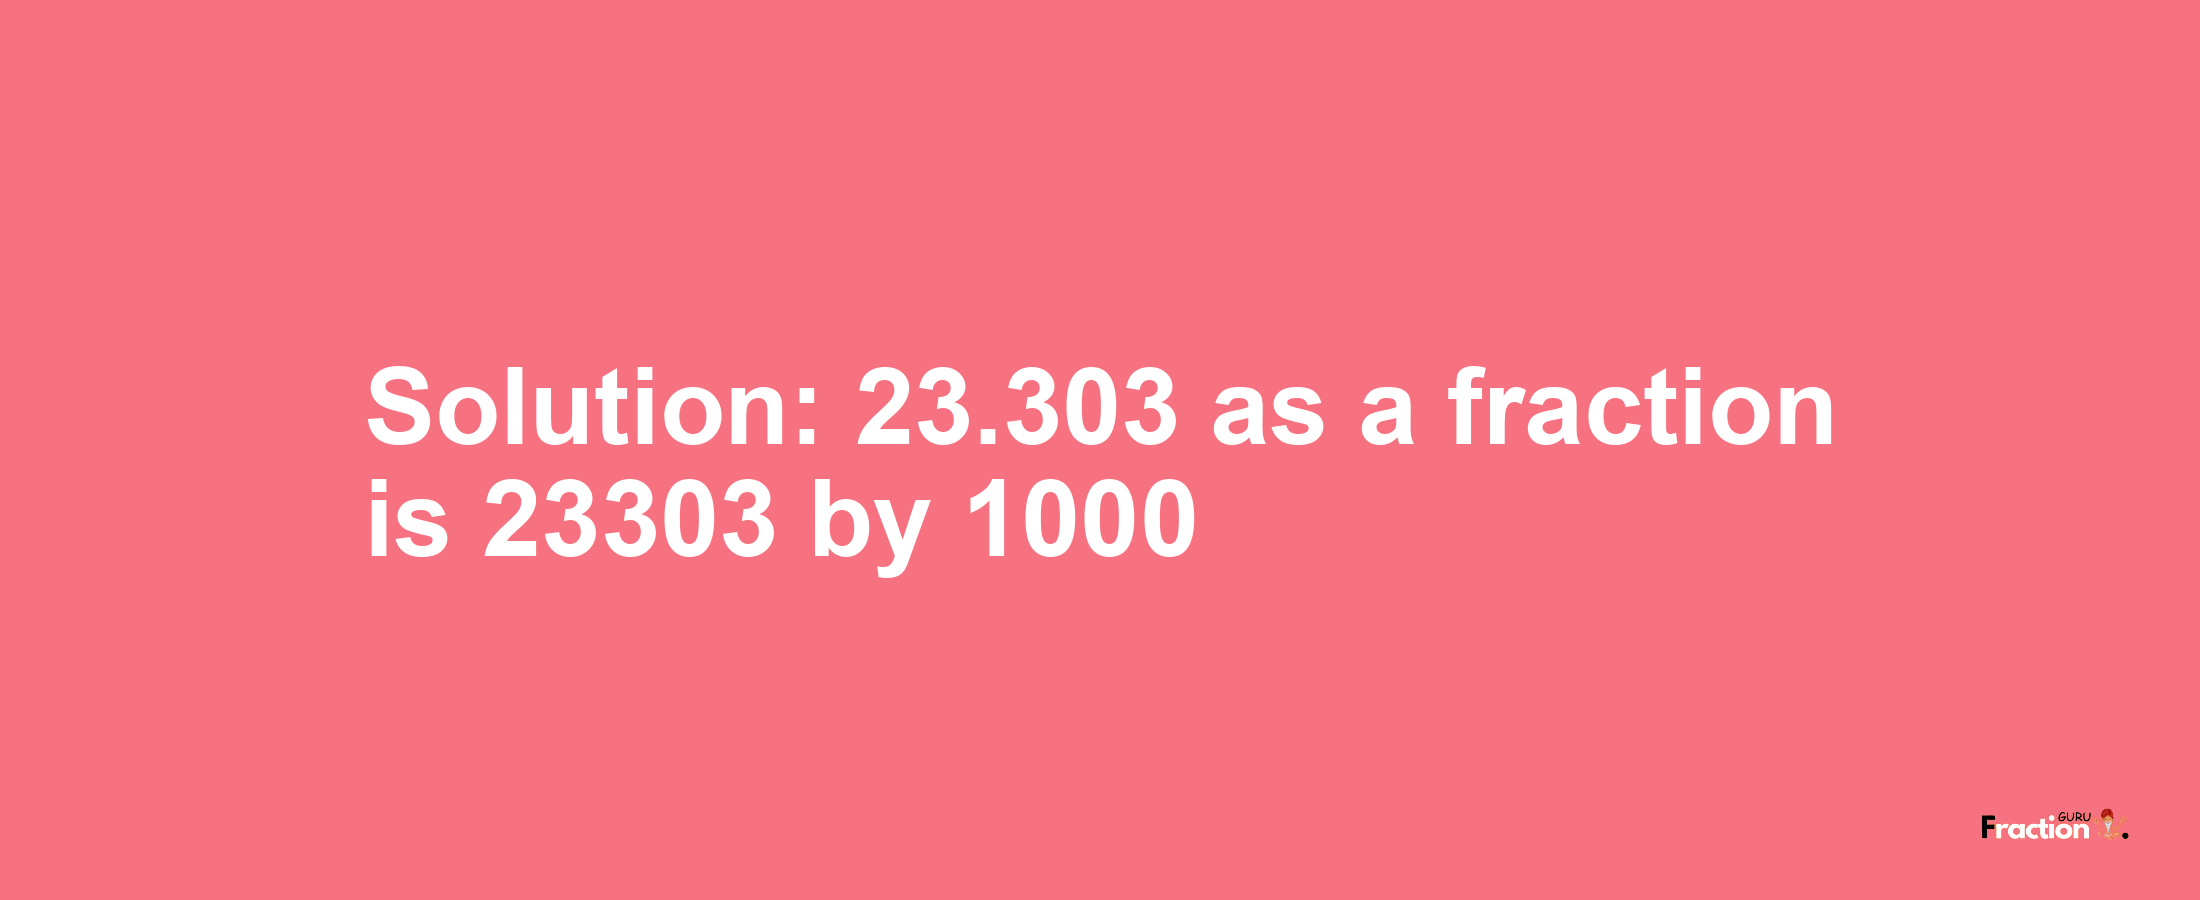 Solution:23.303 as a fraction is 23303/1000